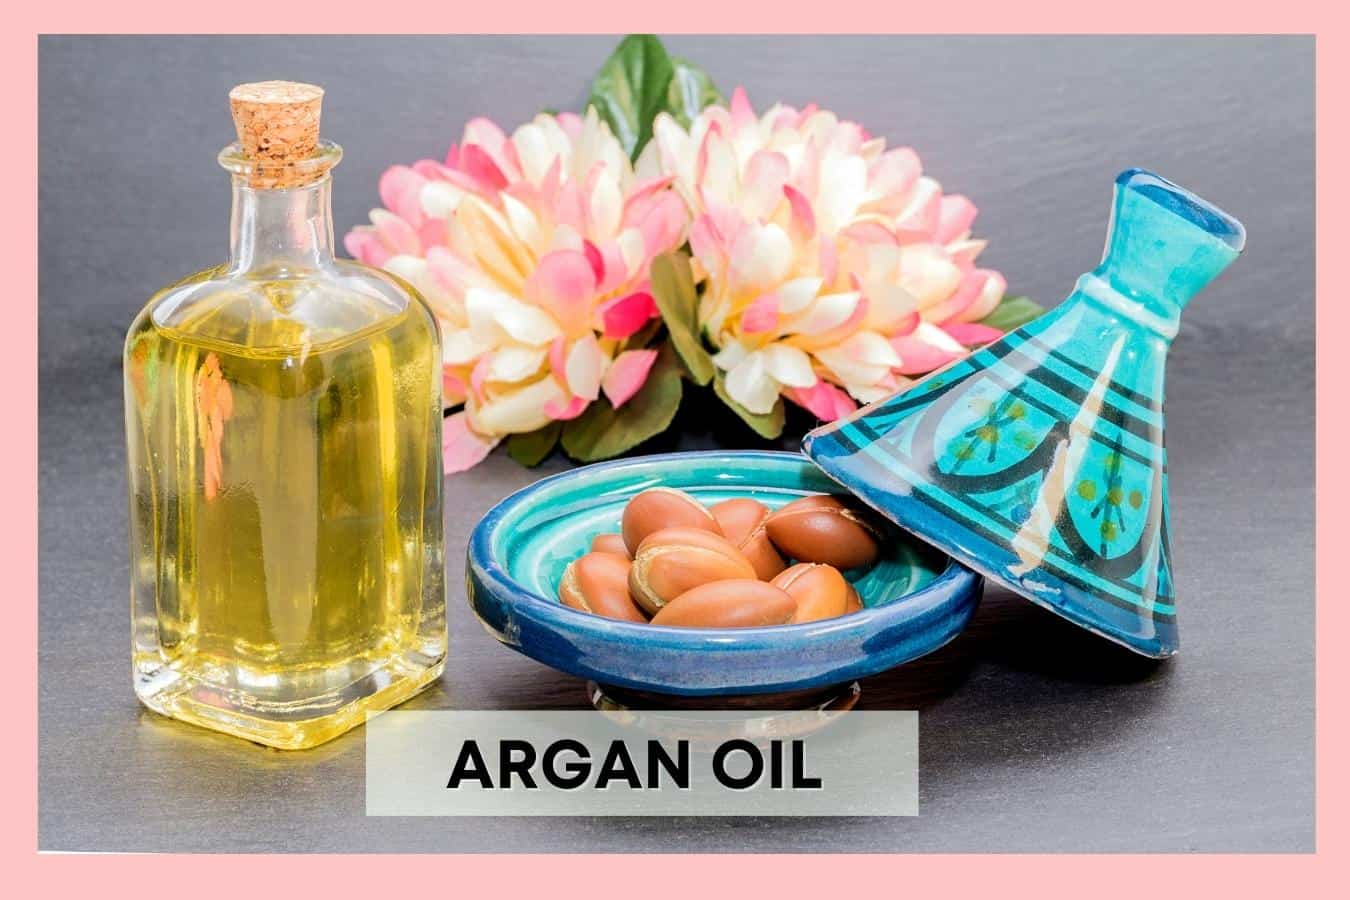 can I use argan oil before using a flat iron